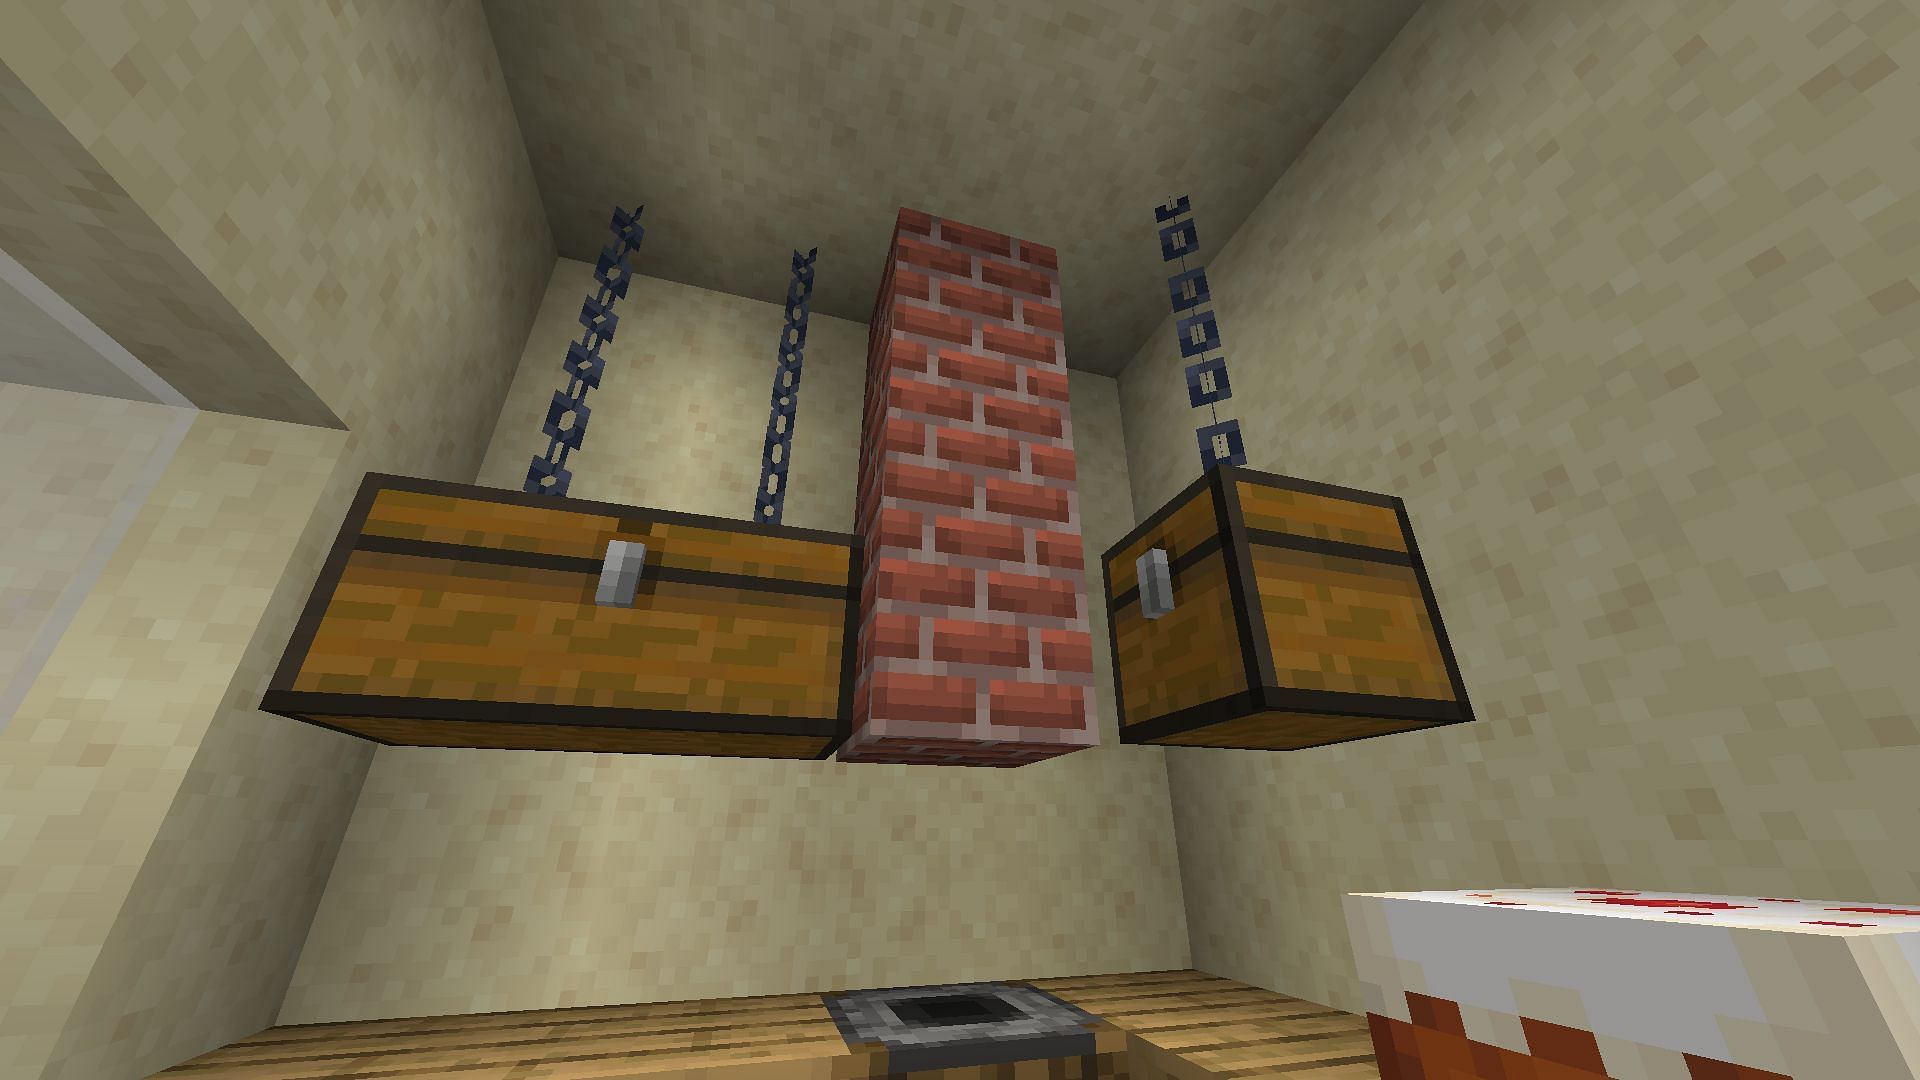 Creating an illusion of chests hanging from chains on the ceiling (Image via Minecraft 1.19 update)